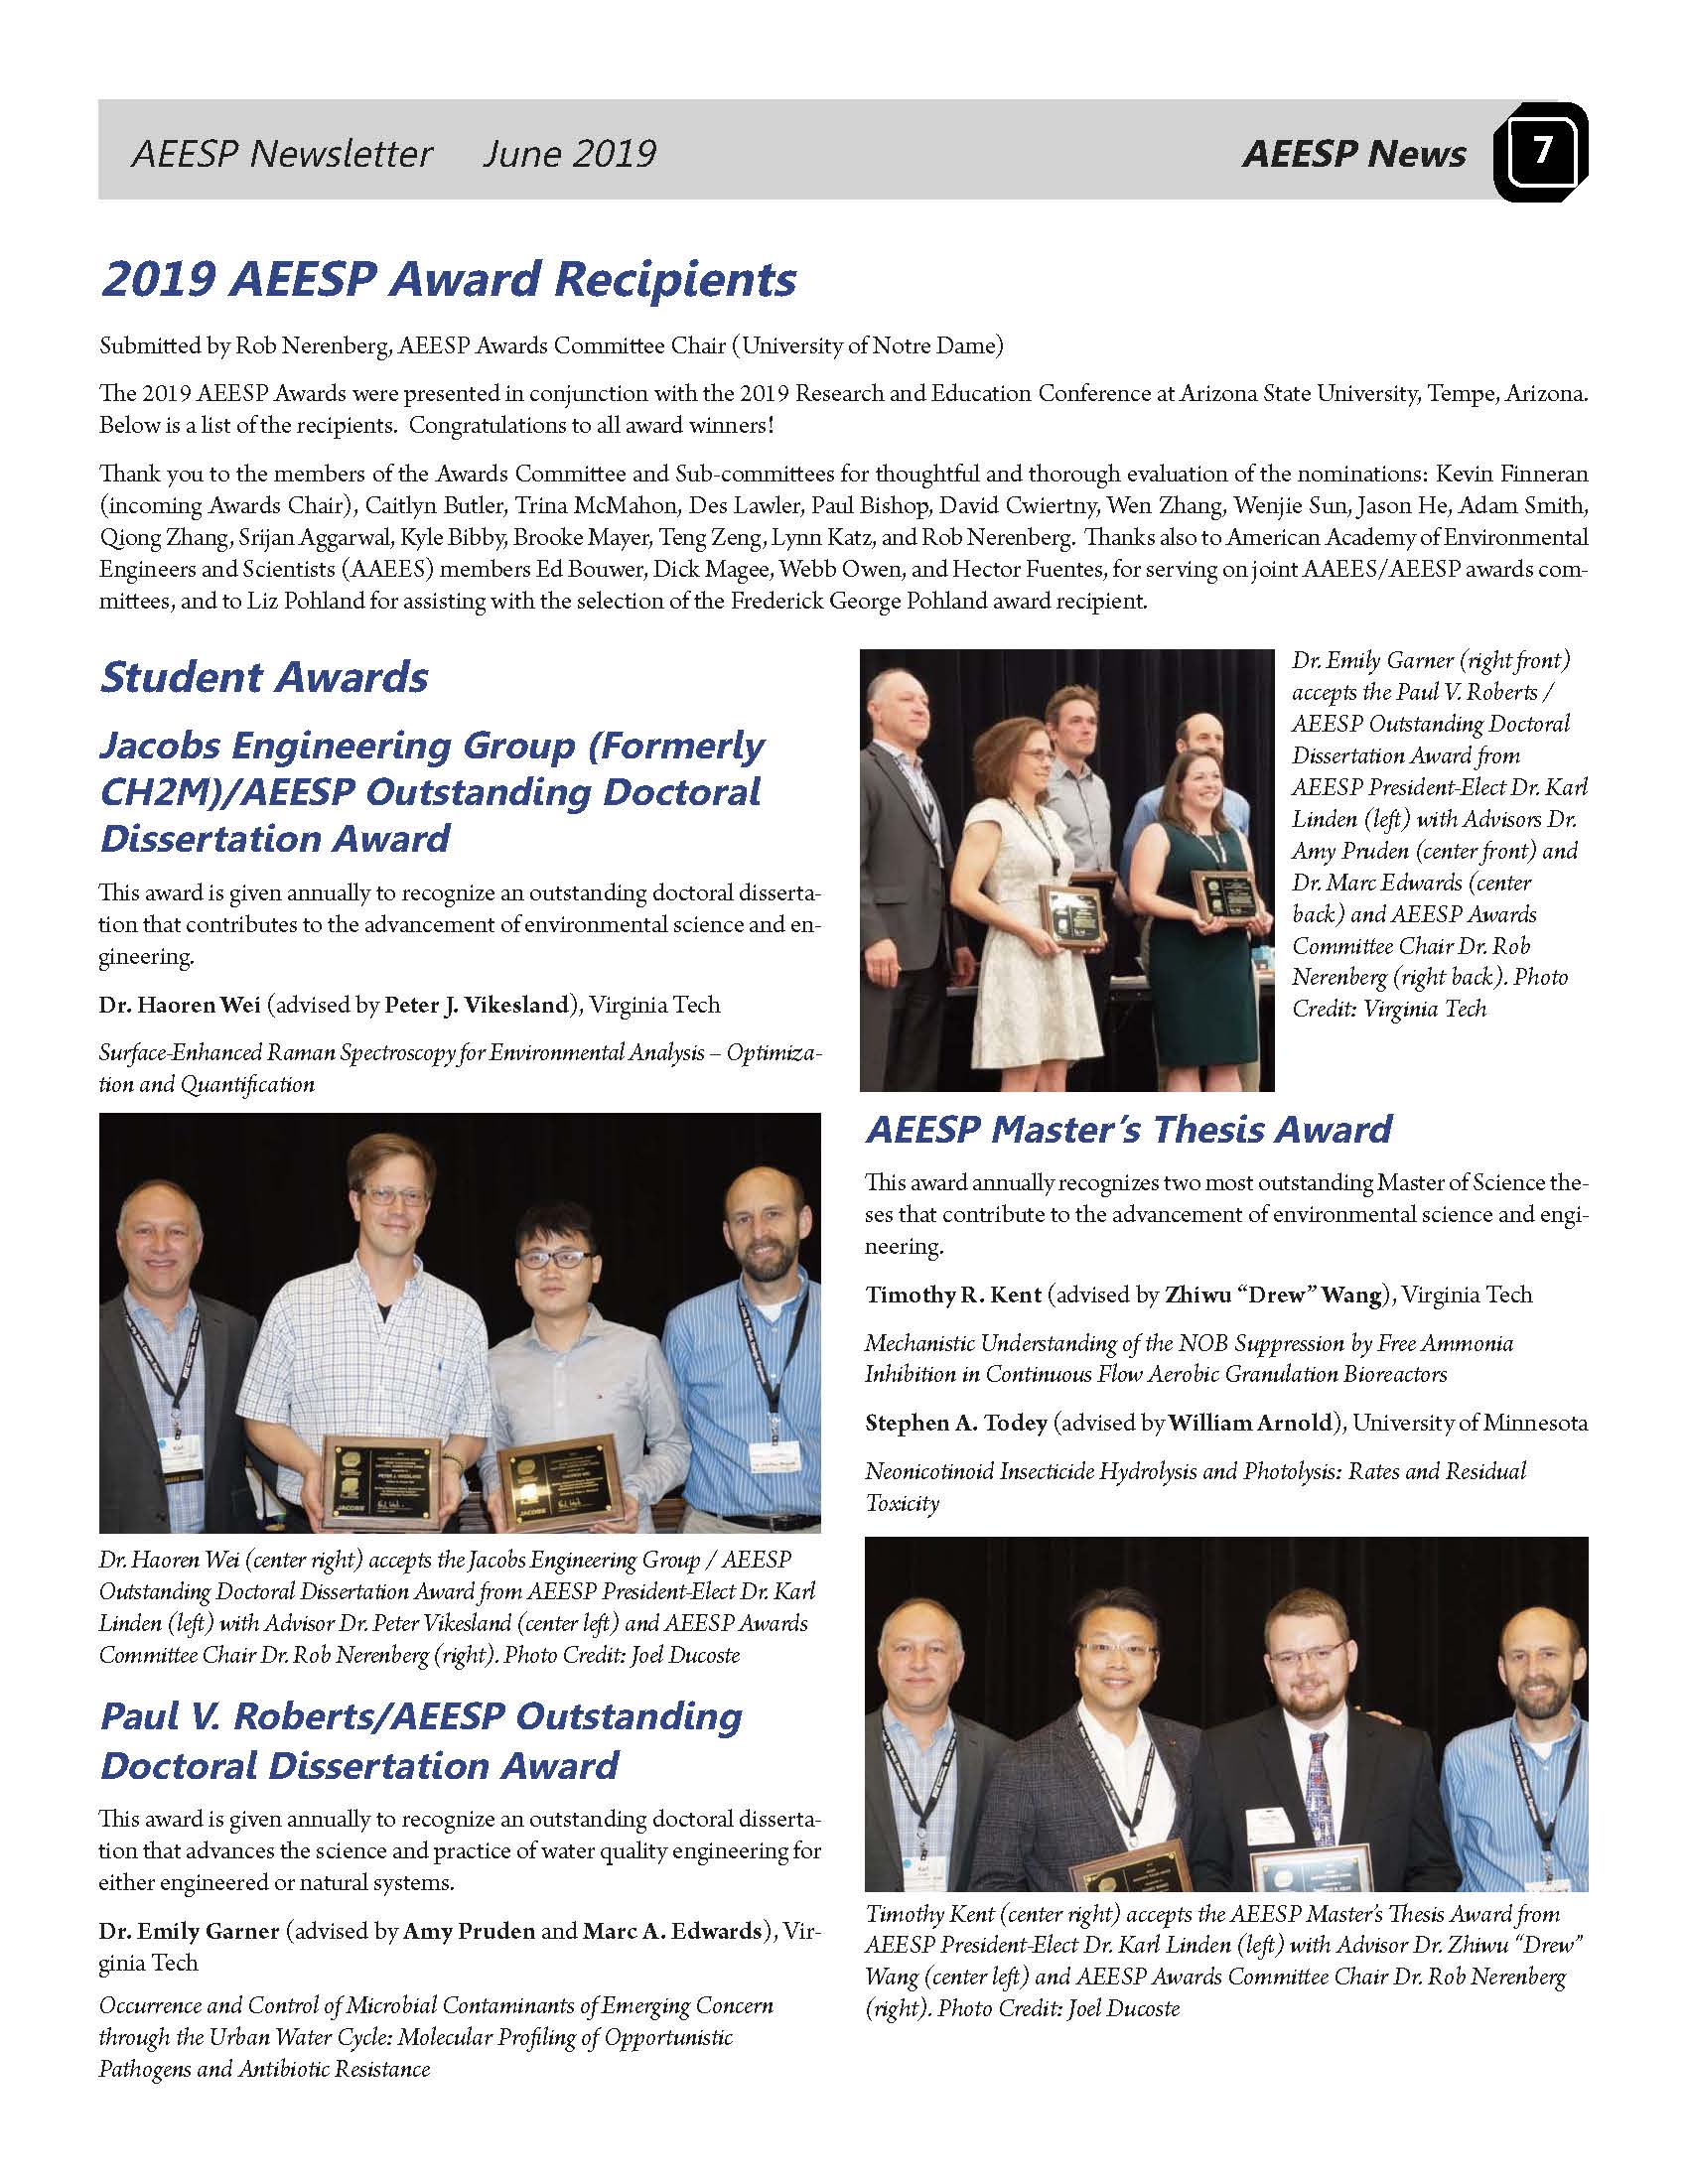 Virginia Tech won three out of the four AEESP best Dissertation/Thesis awards, and we are one of them!